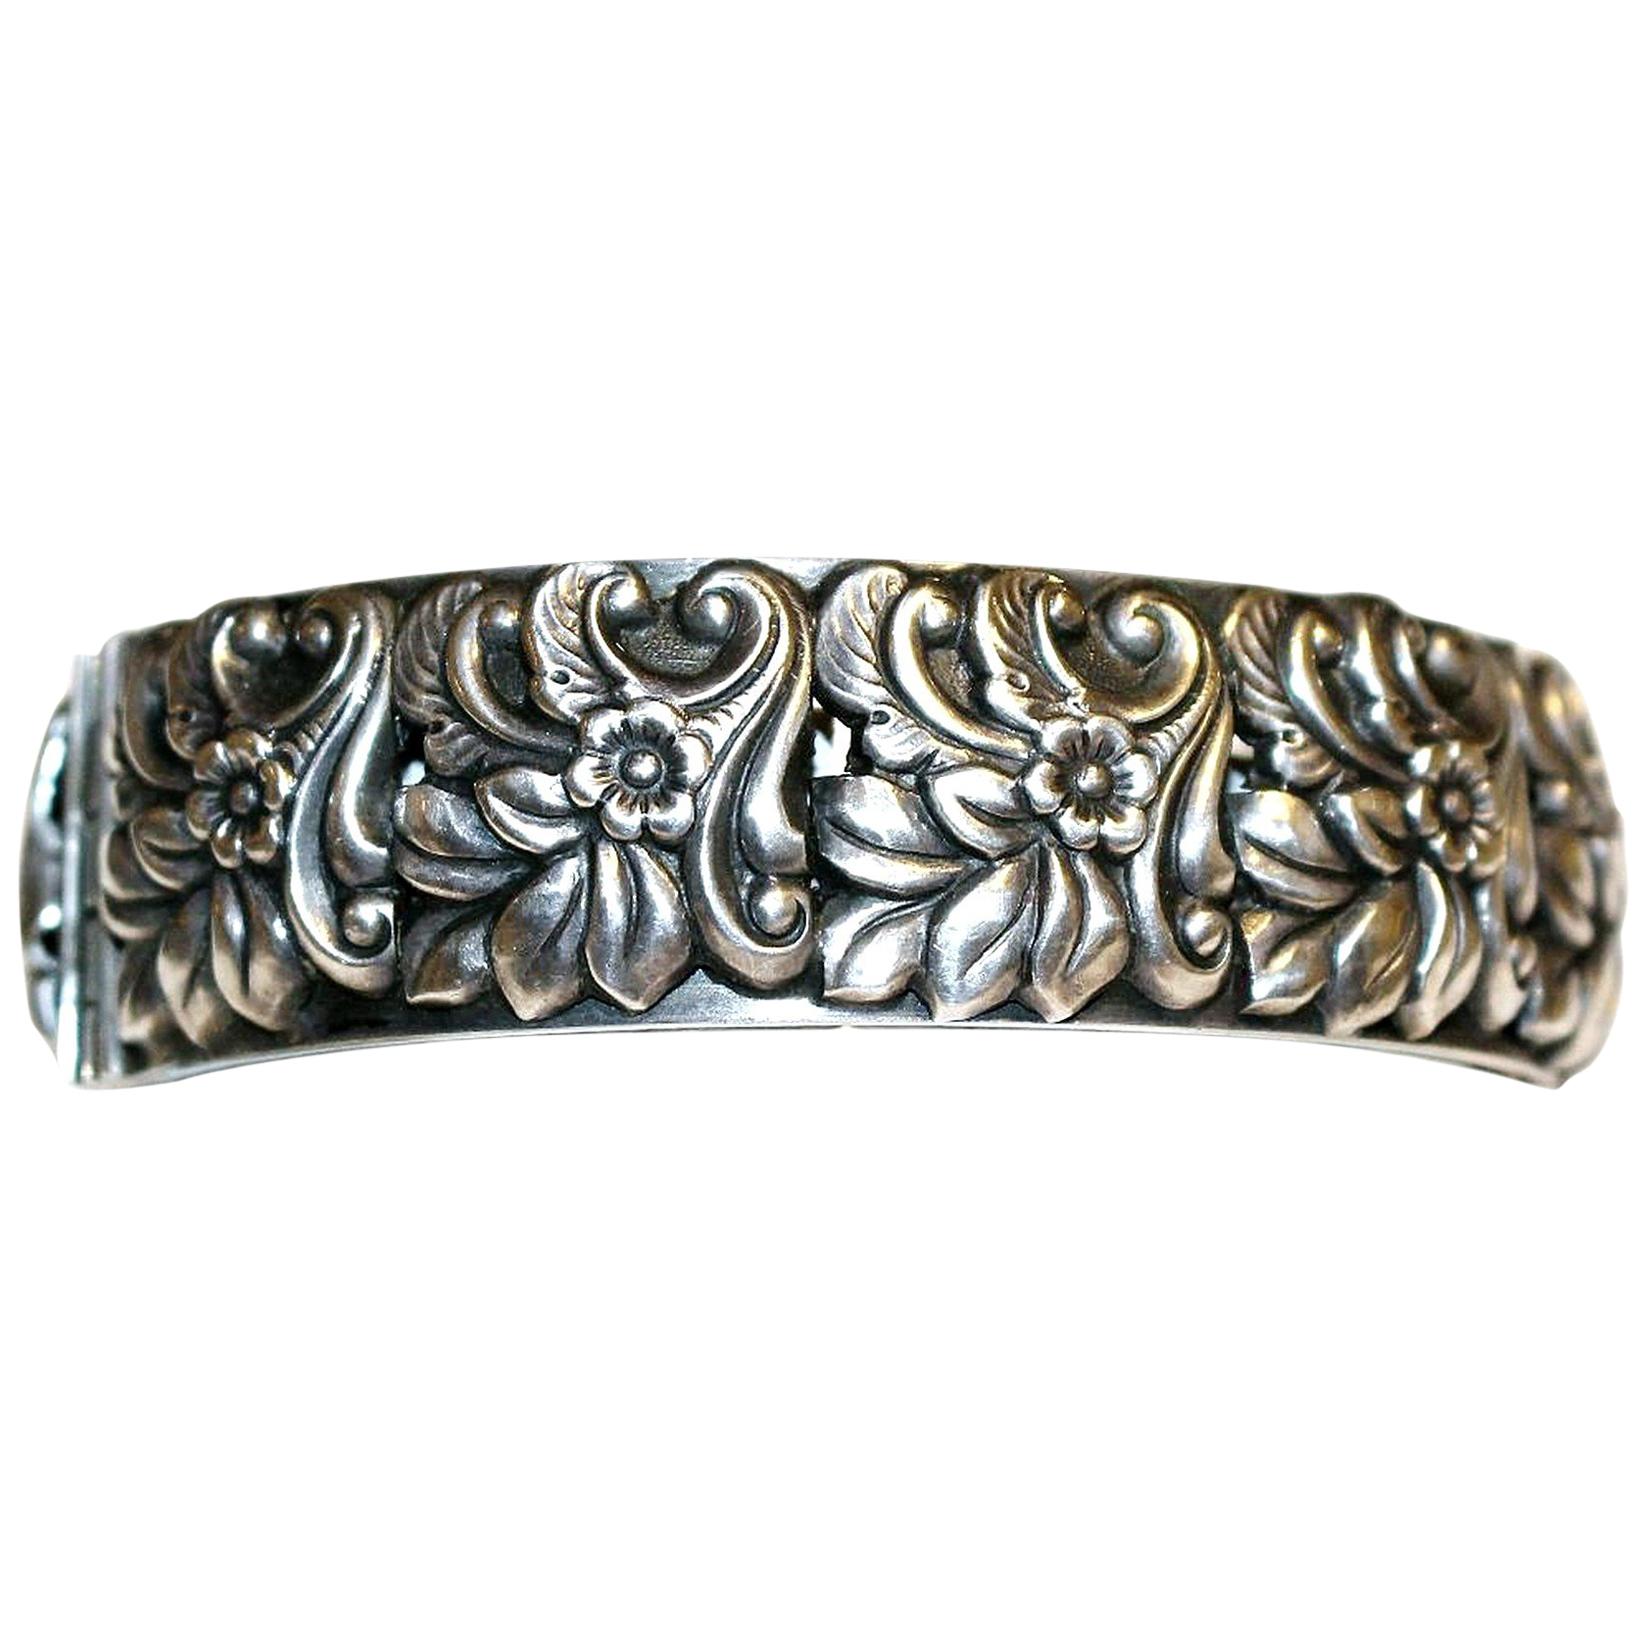 Circa 1950s Sterling Silver Floral Repoussé Hinged Bangle For Sale